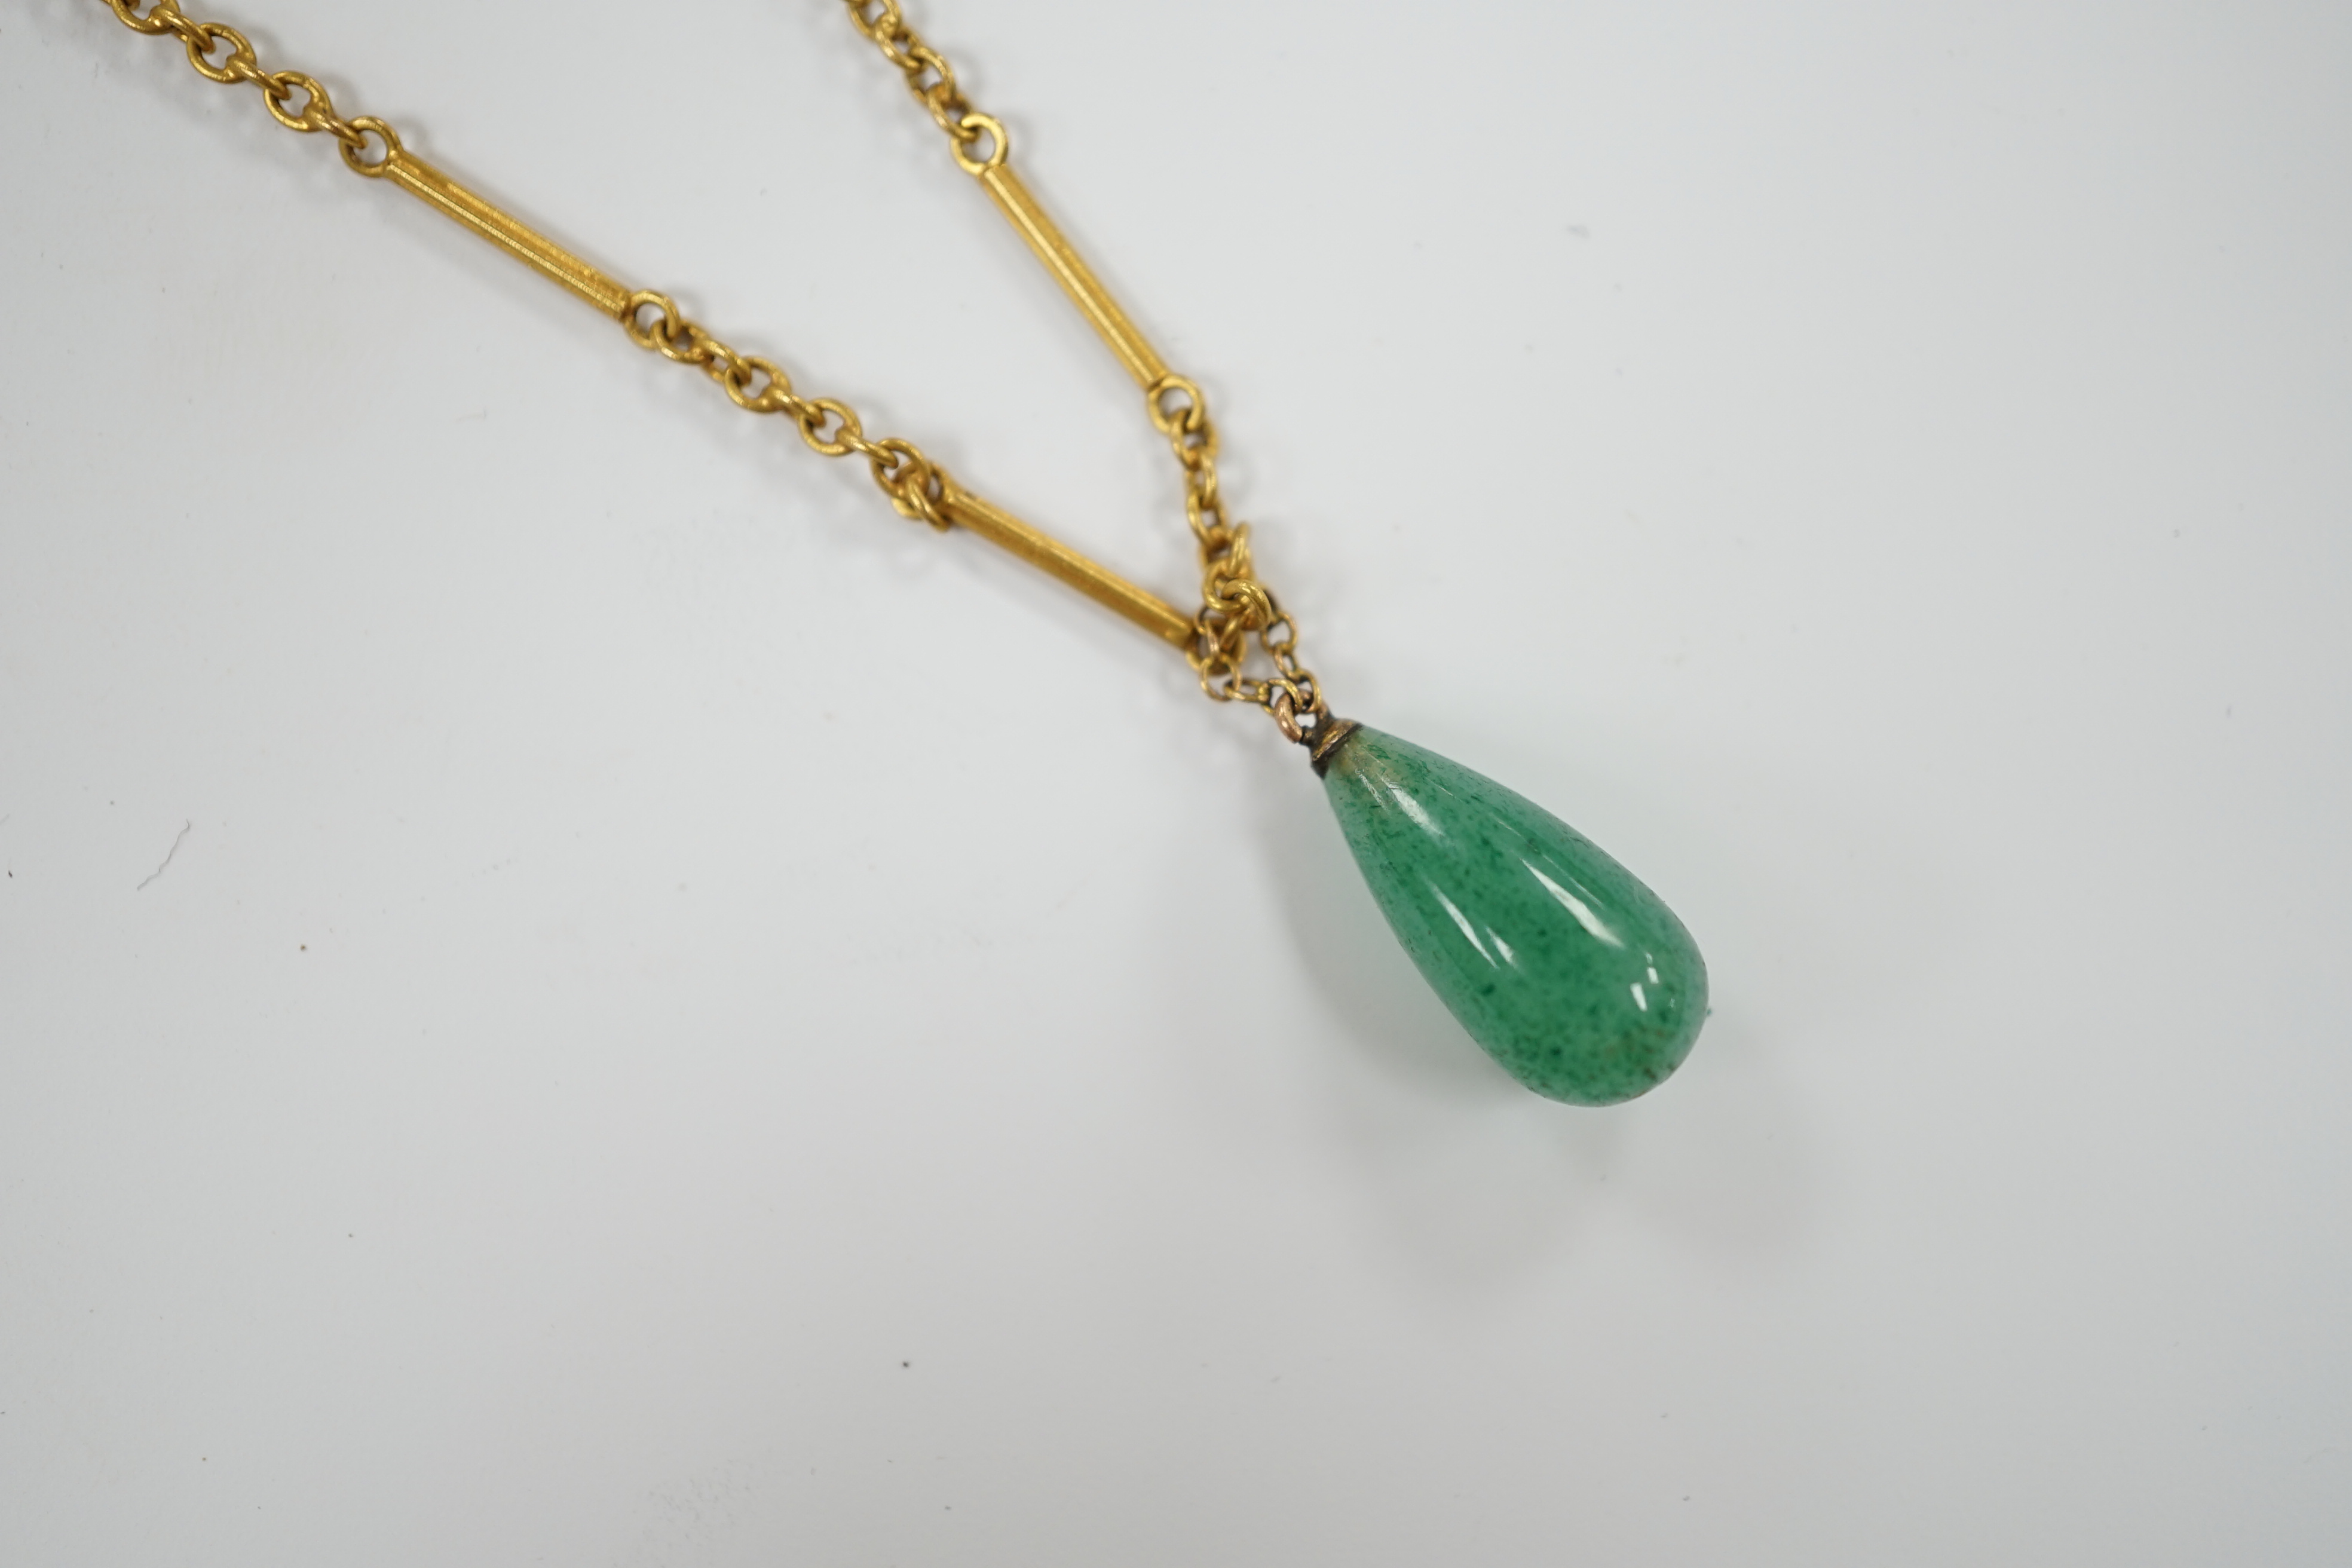 An early 20th century 15ct and single stone pear shaped simulated jade set pendant necklace, overall 46cm, gross weight 6 grams. Condition - good